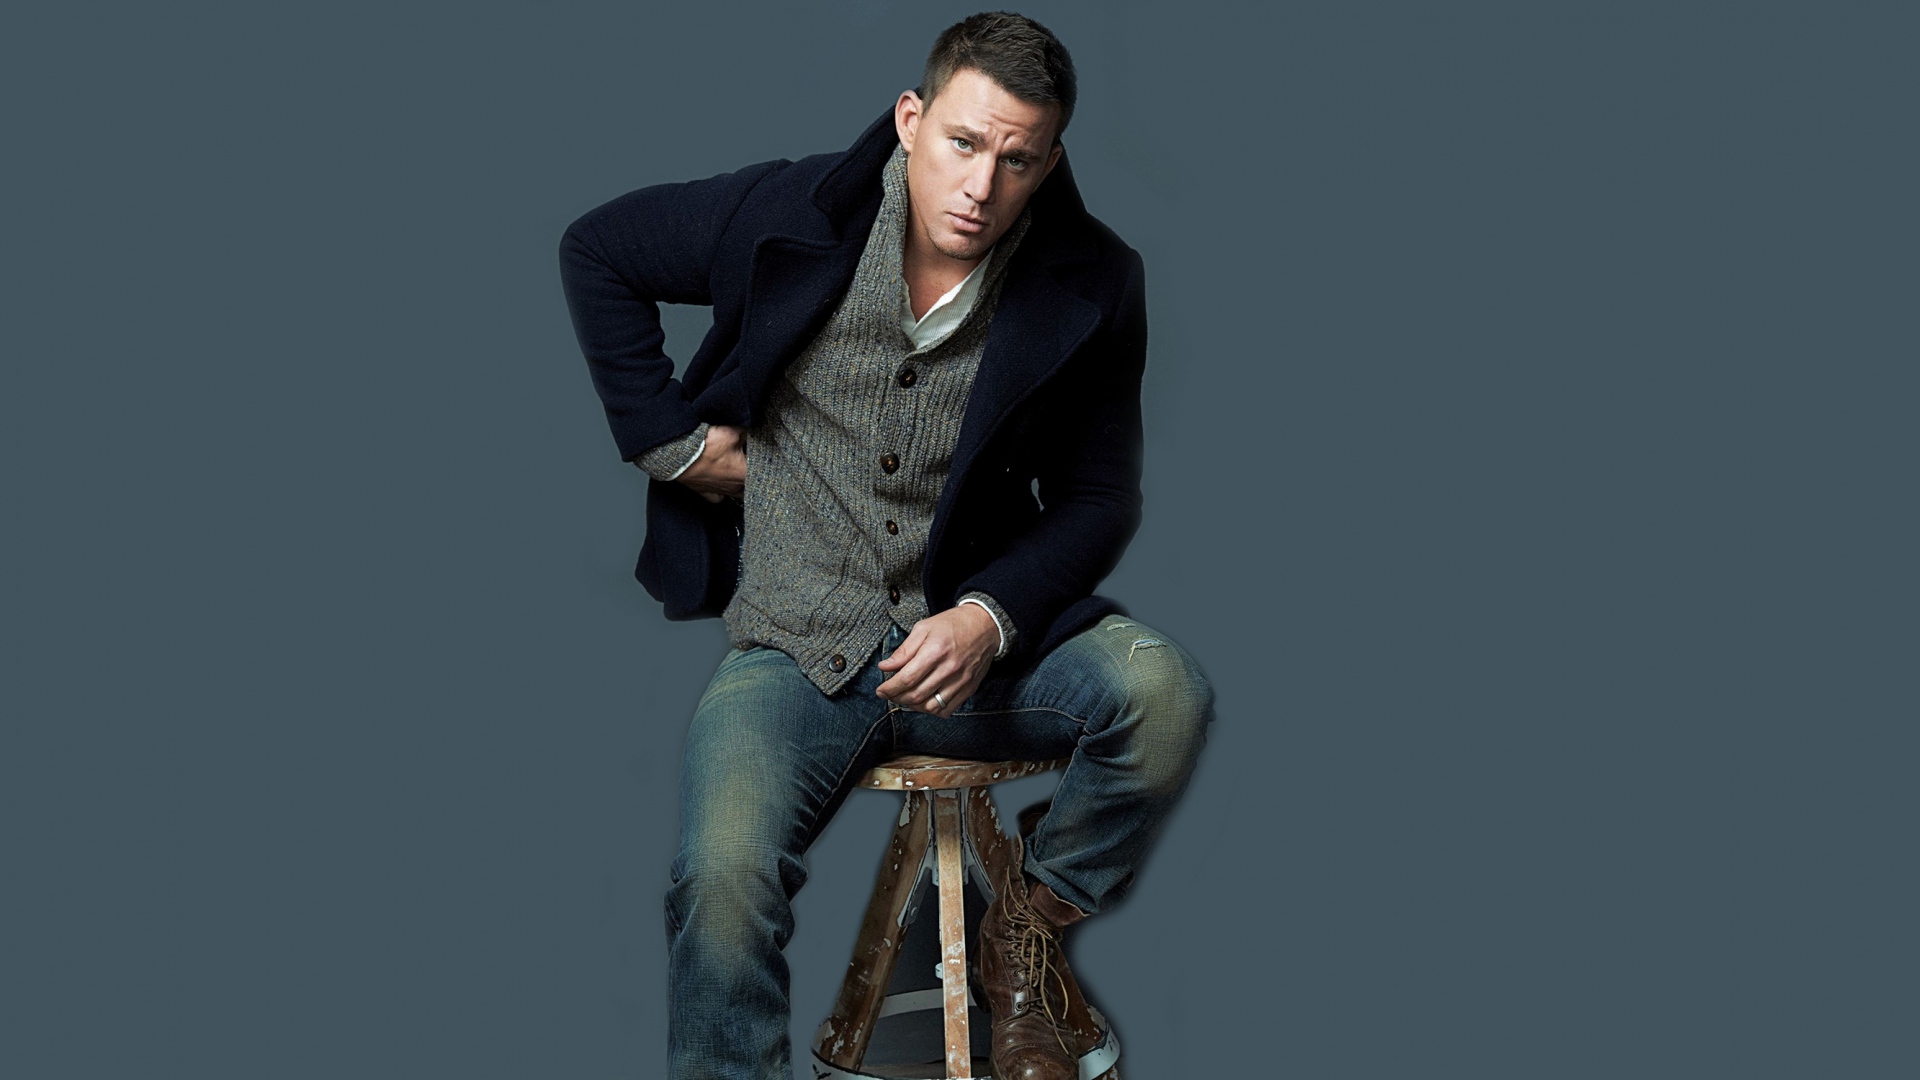 Channing Tatum Wallpaper High Resolution And Quality